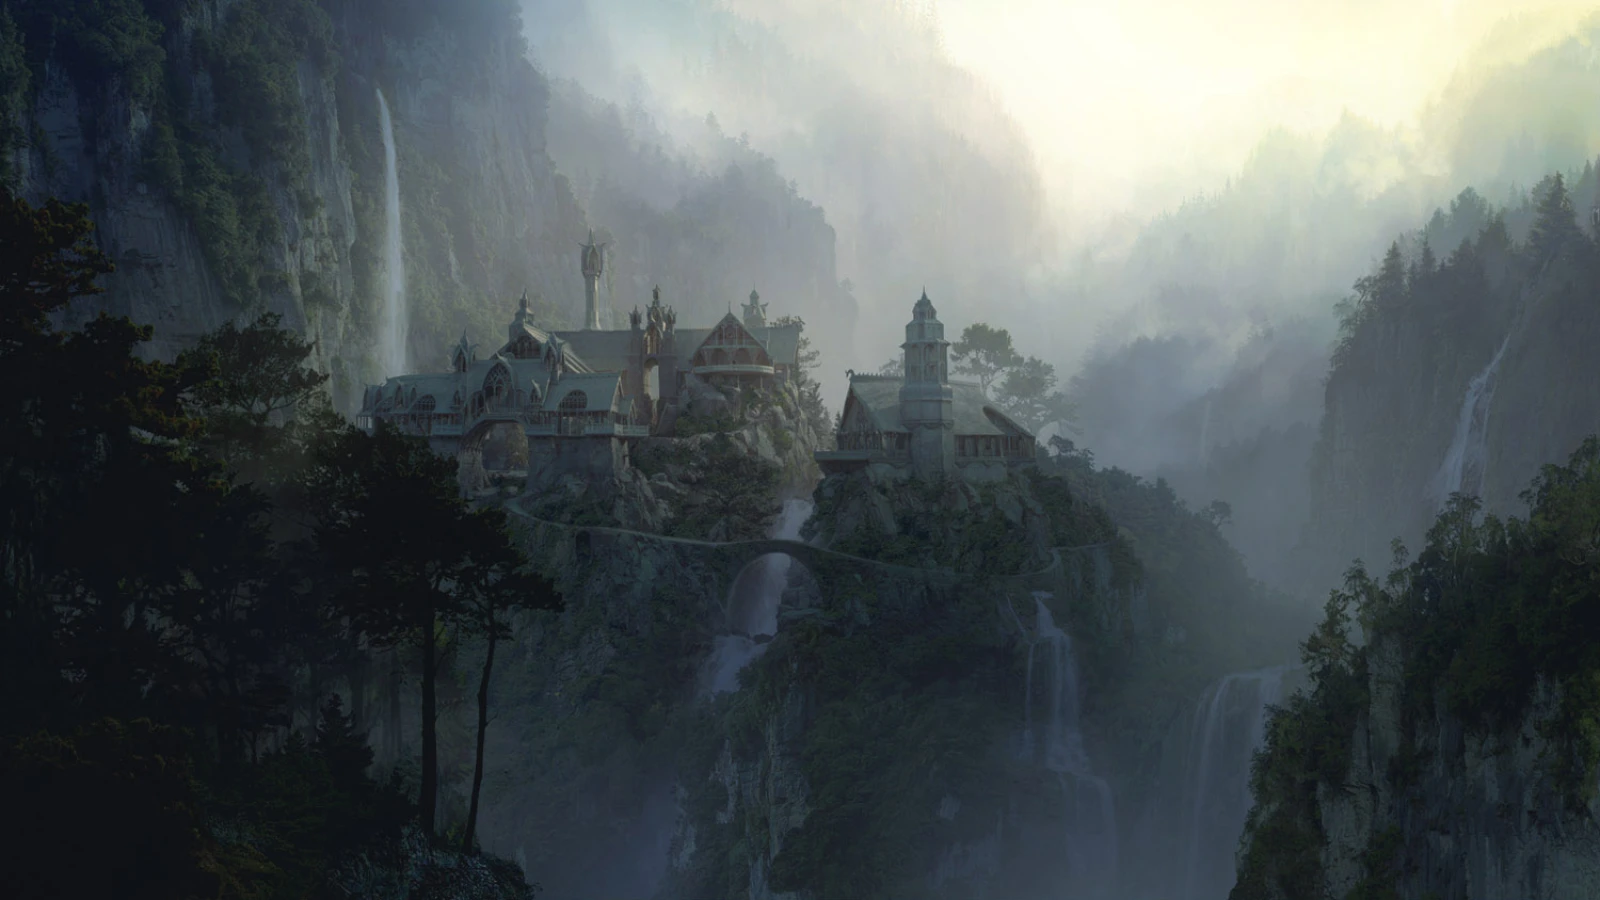  Forest city waterfall digital matte painting by Dusso 